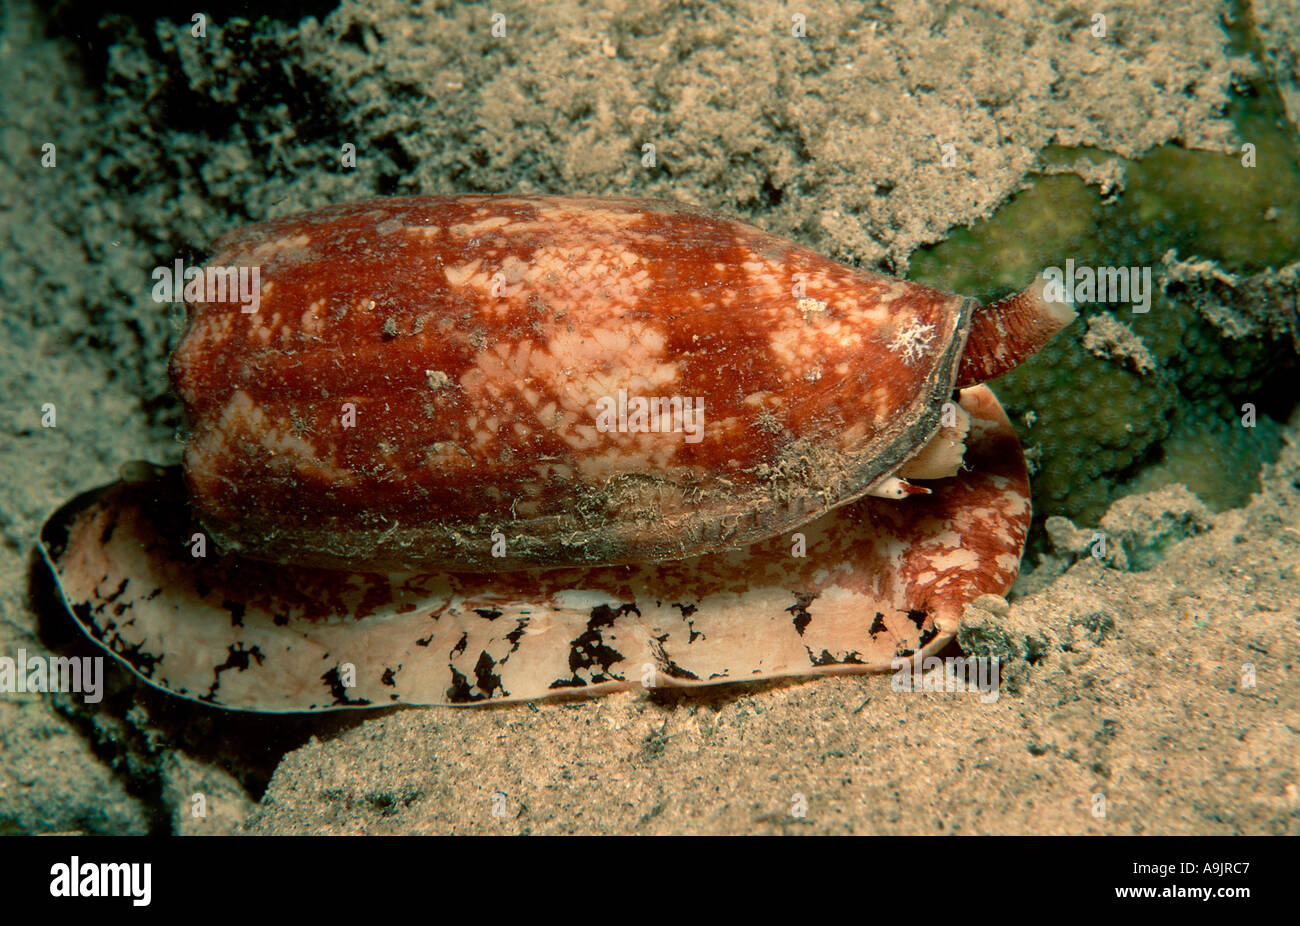 Front Gilled Snails Conus geographus Stock Photo